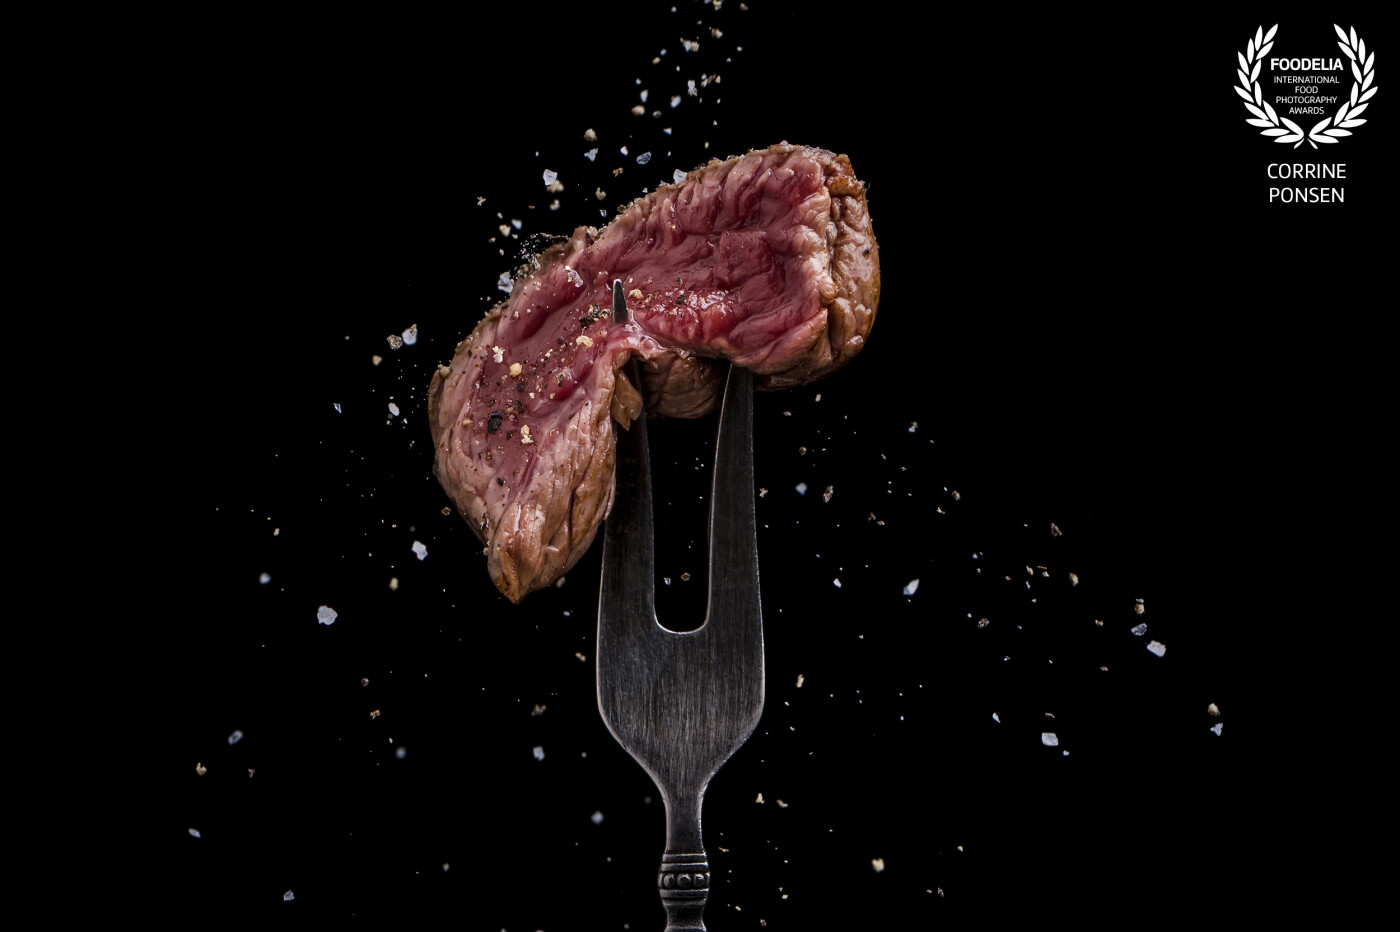 This beautyful juicy steak is grilled. A small piece of that steak is on top of a vintage fork. Himalaya salt is flying around the steak.